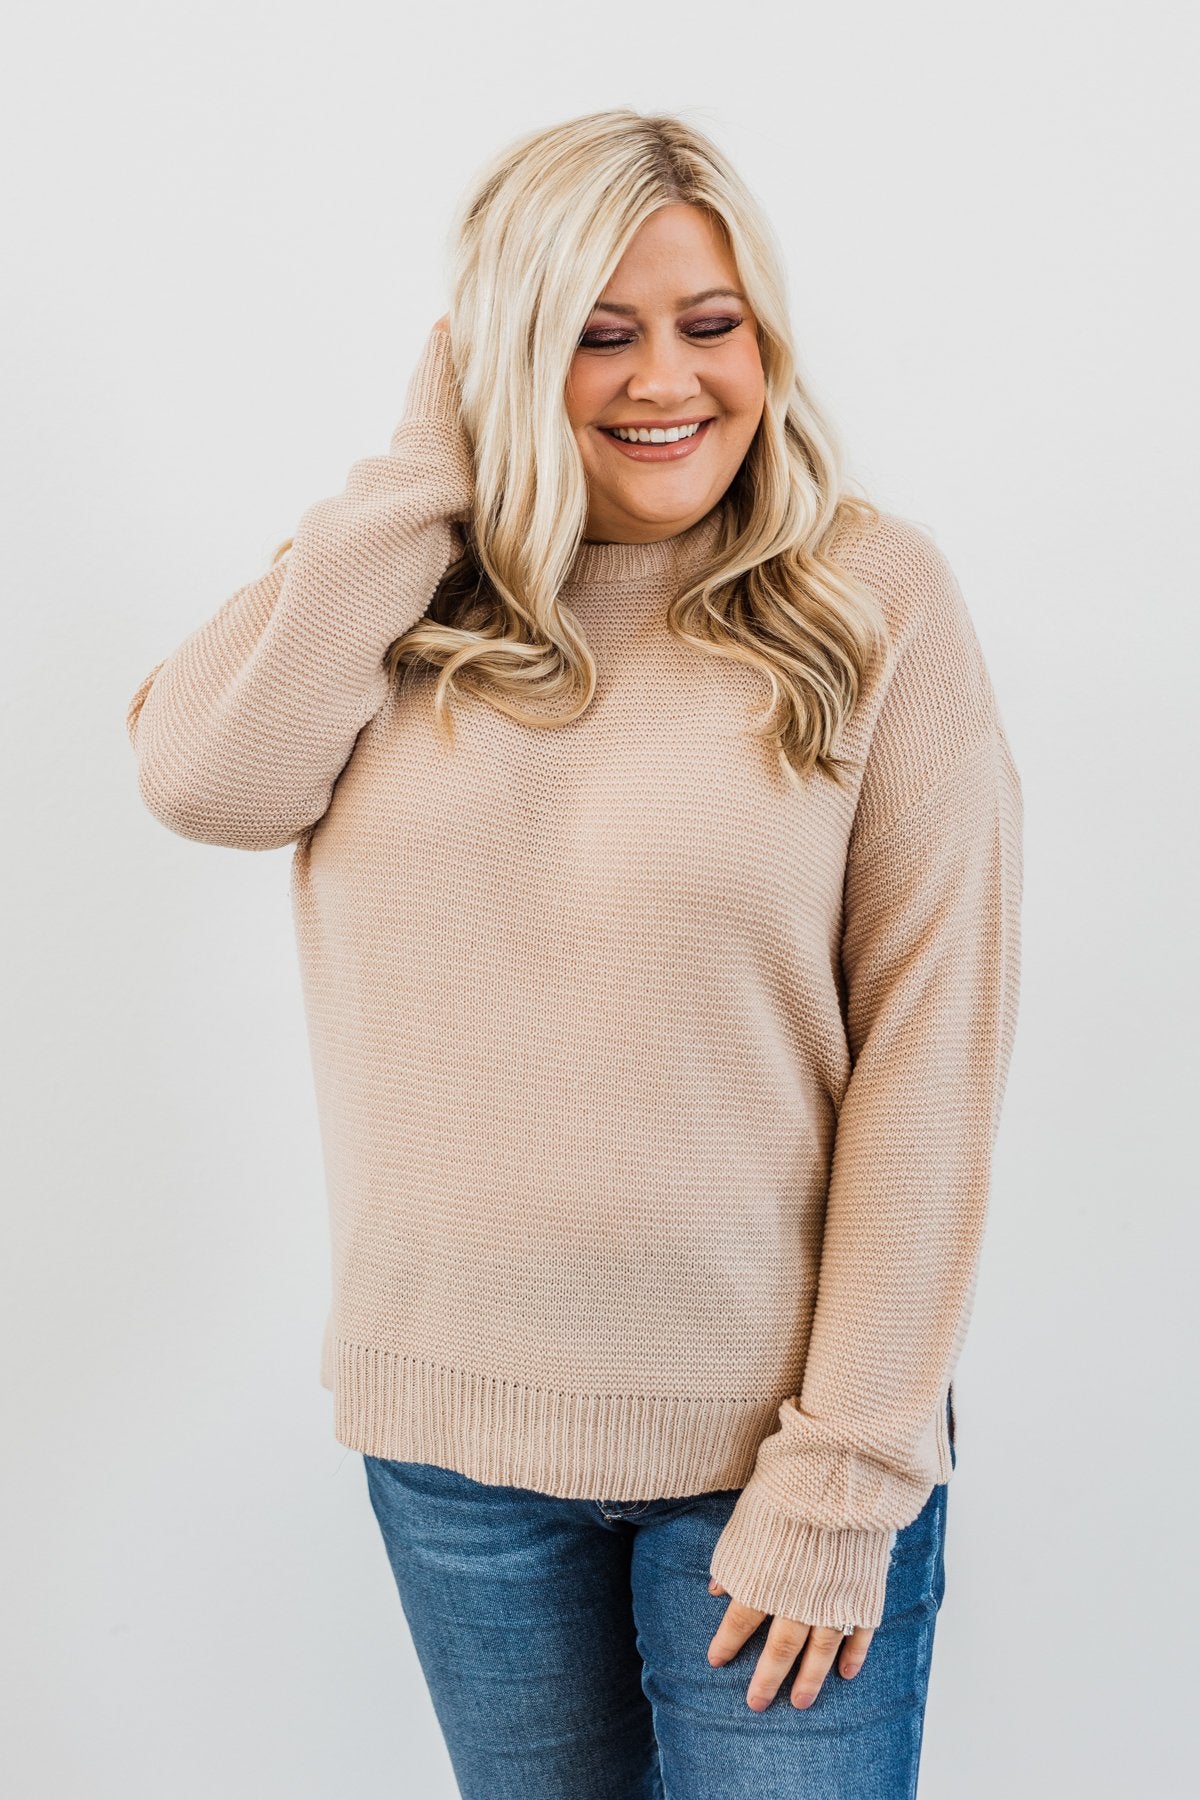 Today Is The Day Knit Sweater- Light Taupe